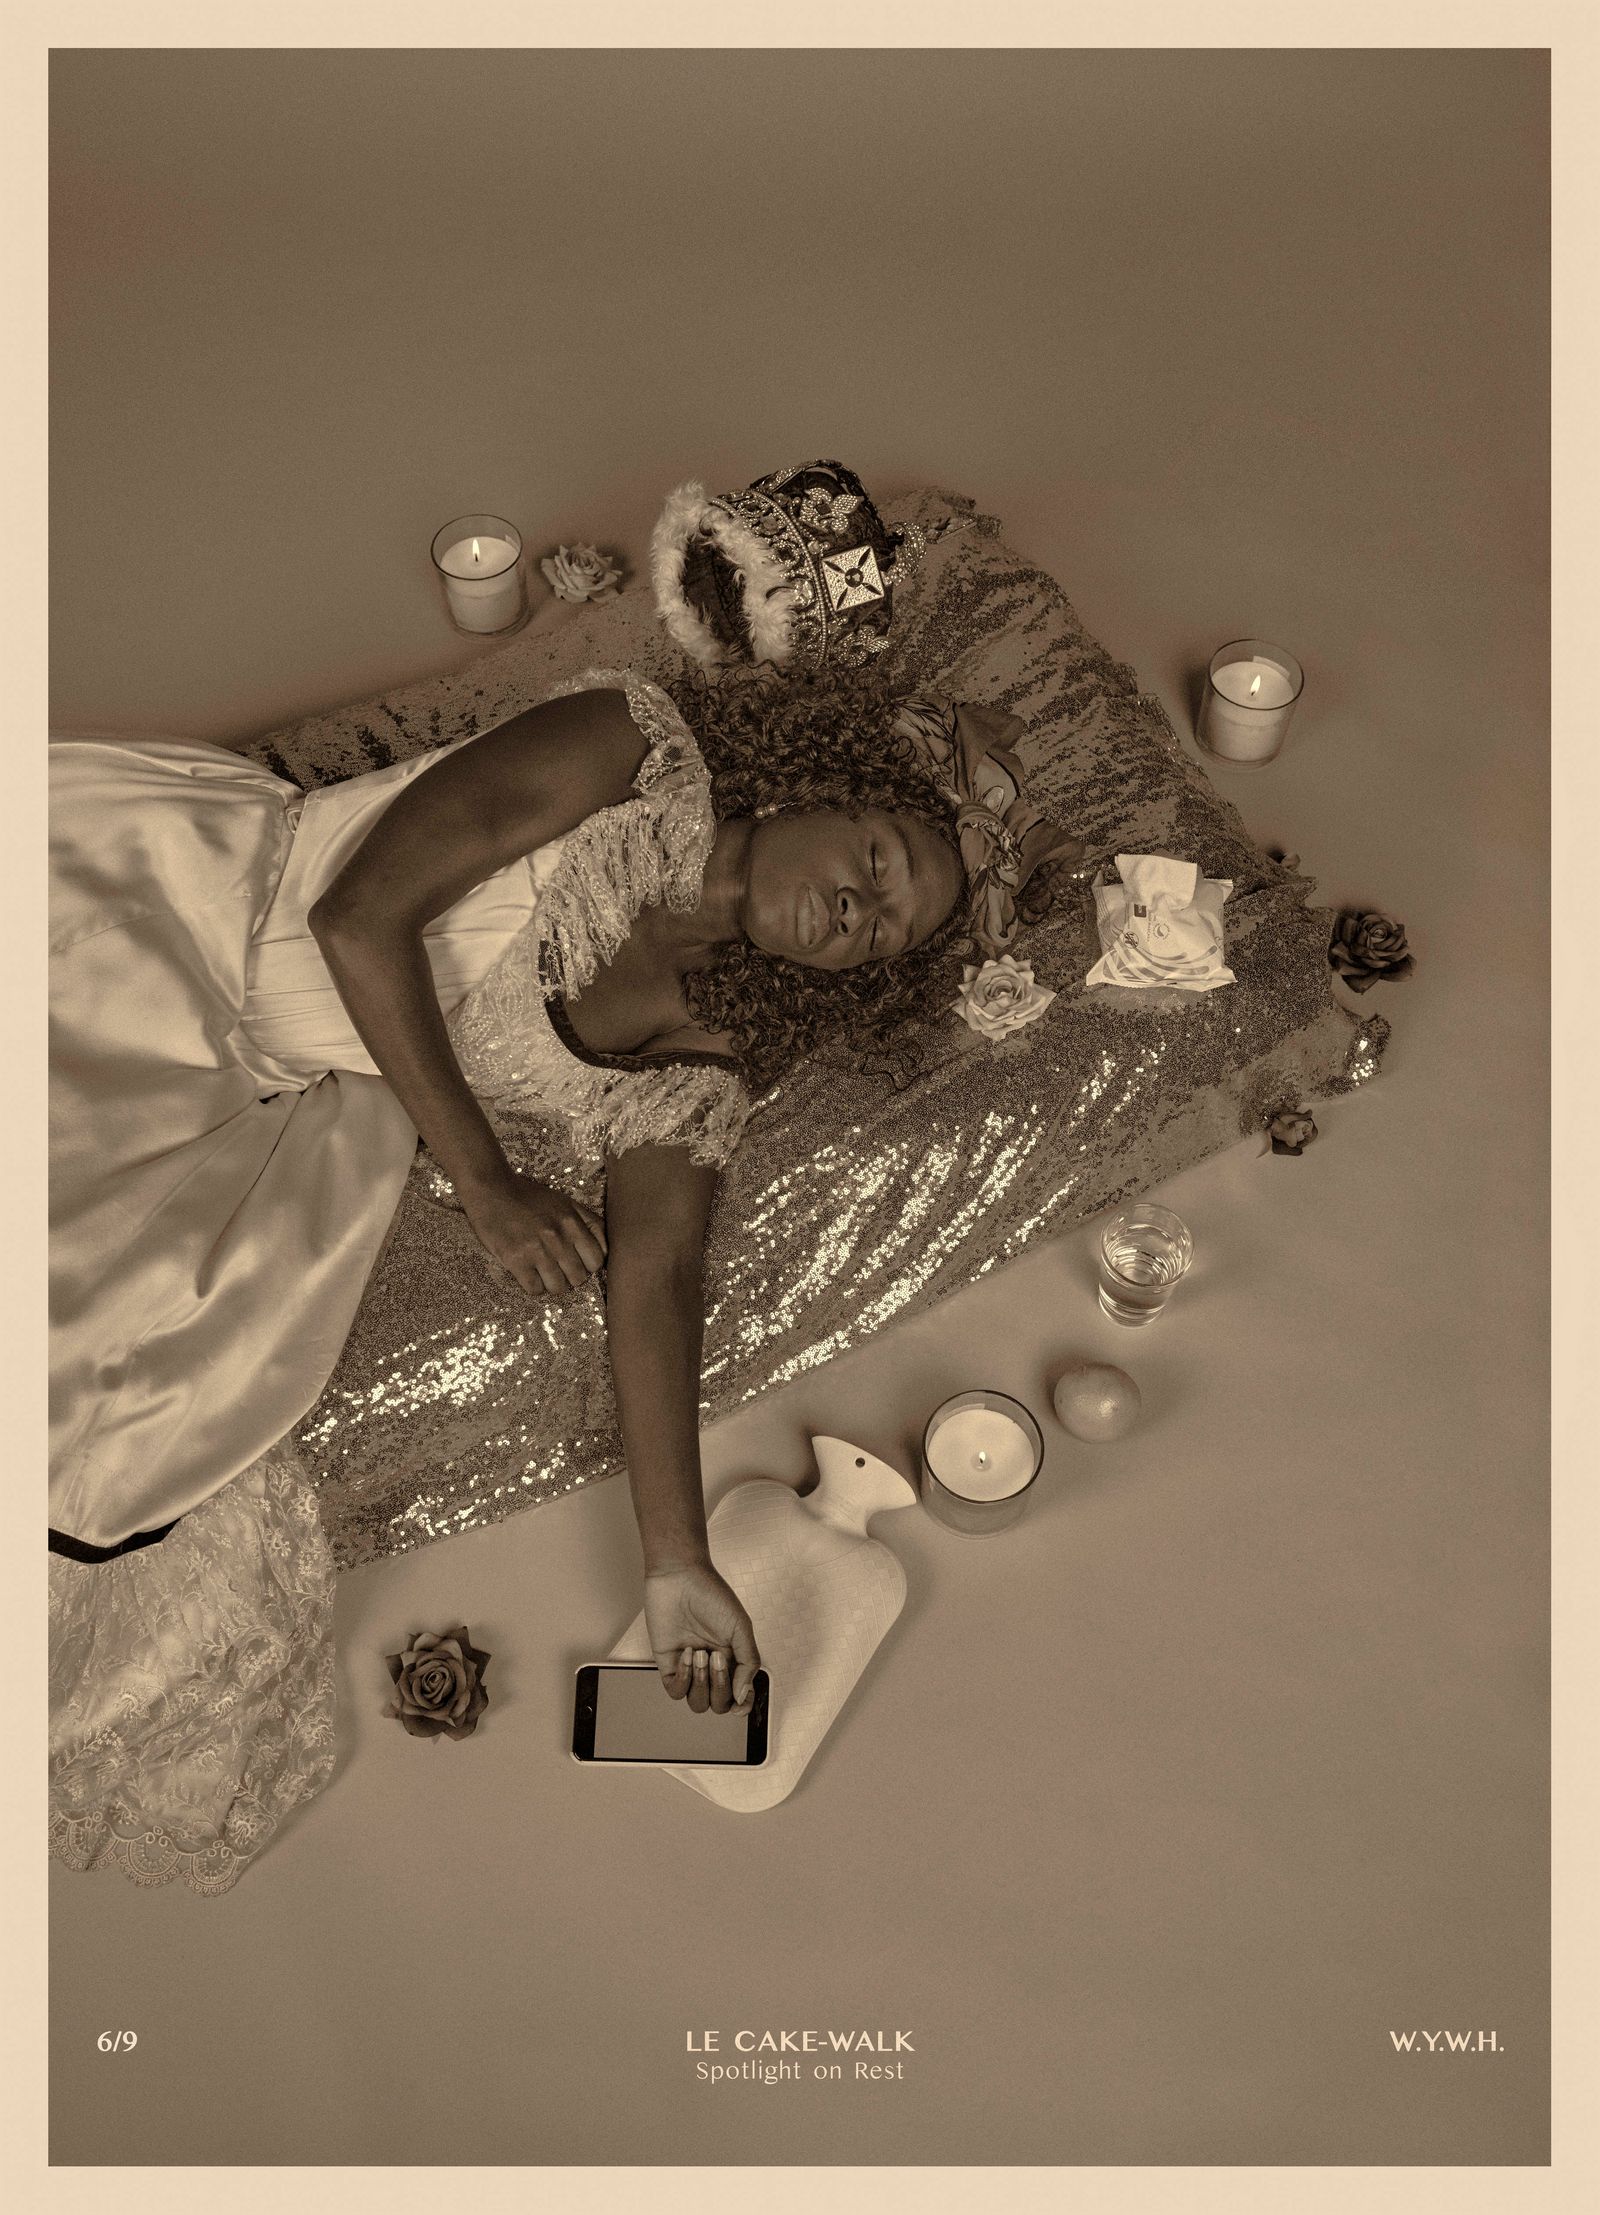 © Heather Agyepong - Le Cake-Walk: Spotlight on Rest (#6), 2020, Heather Agyepong. (Commissioned by The Hyman Collection)